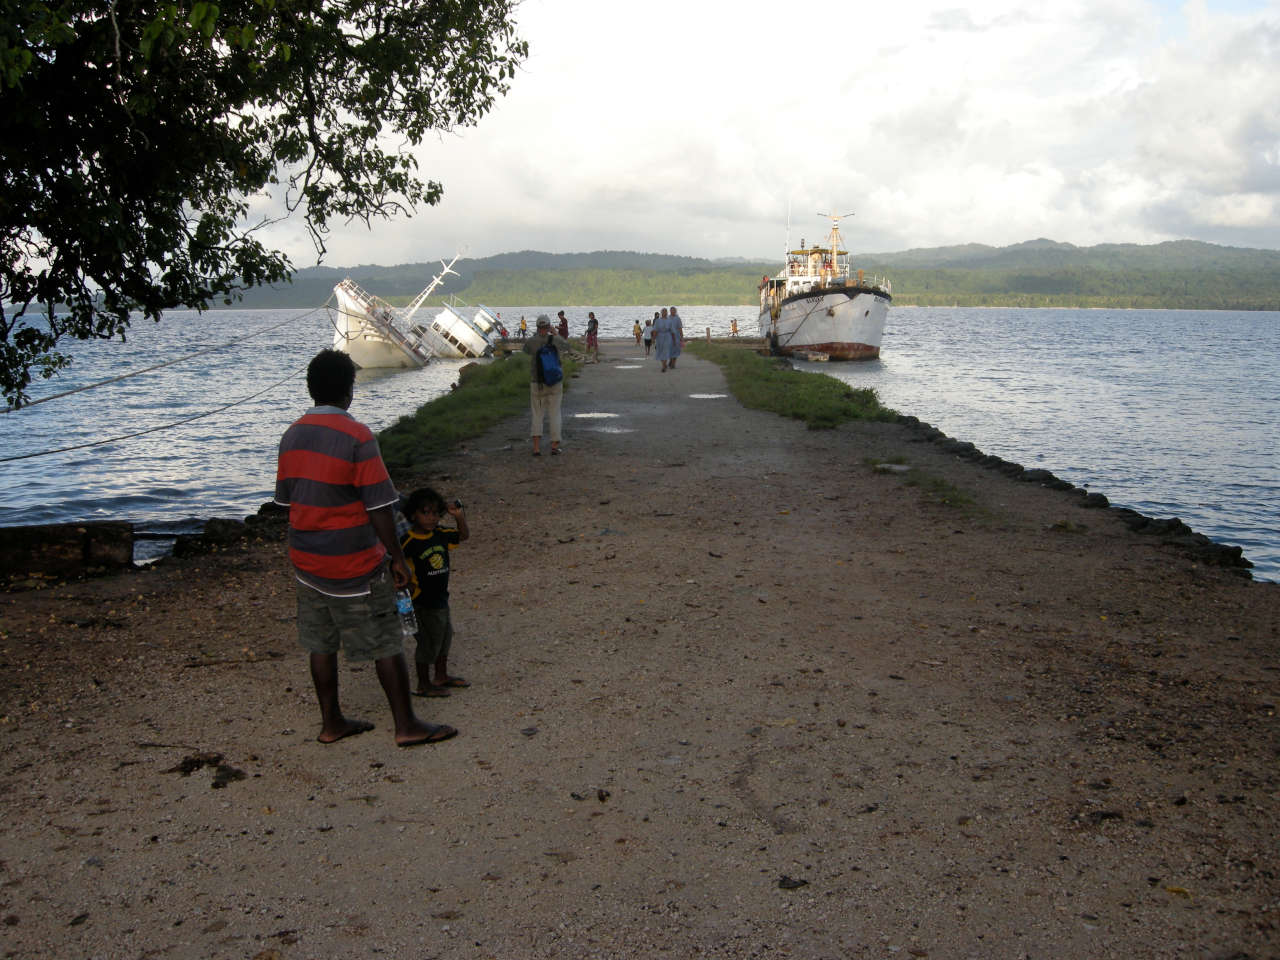 A wharf with people on it and a ship docked